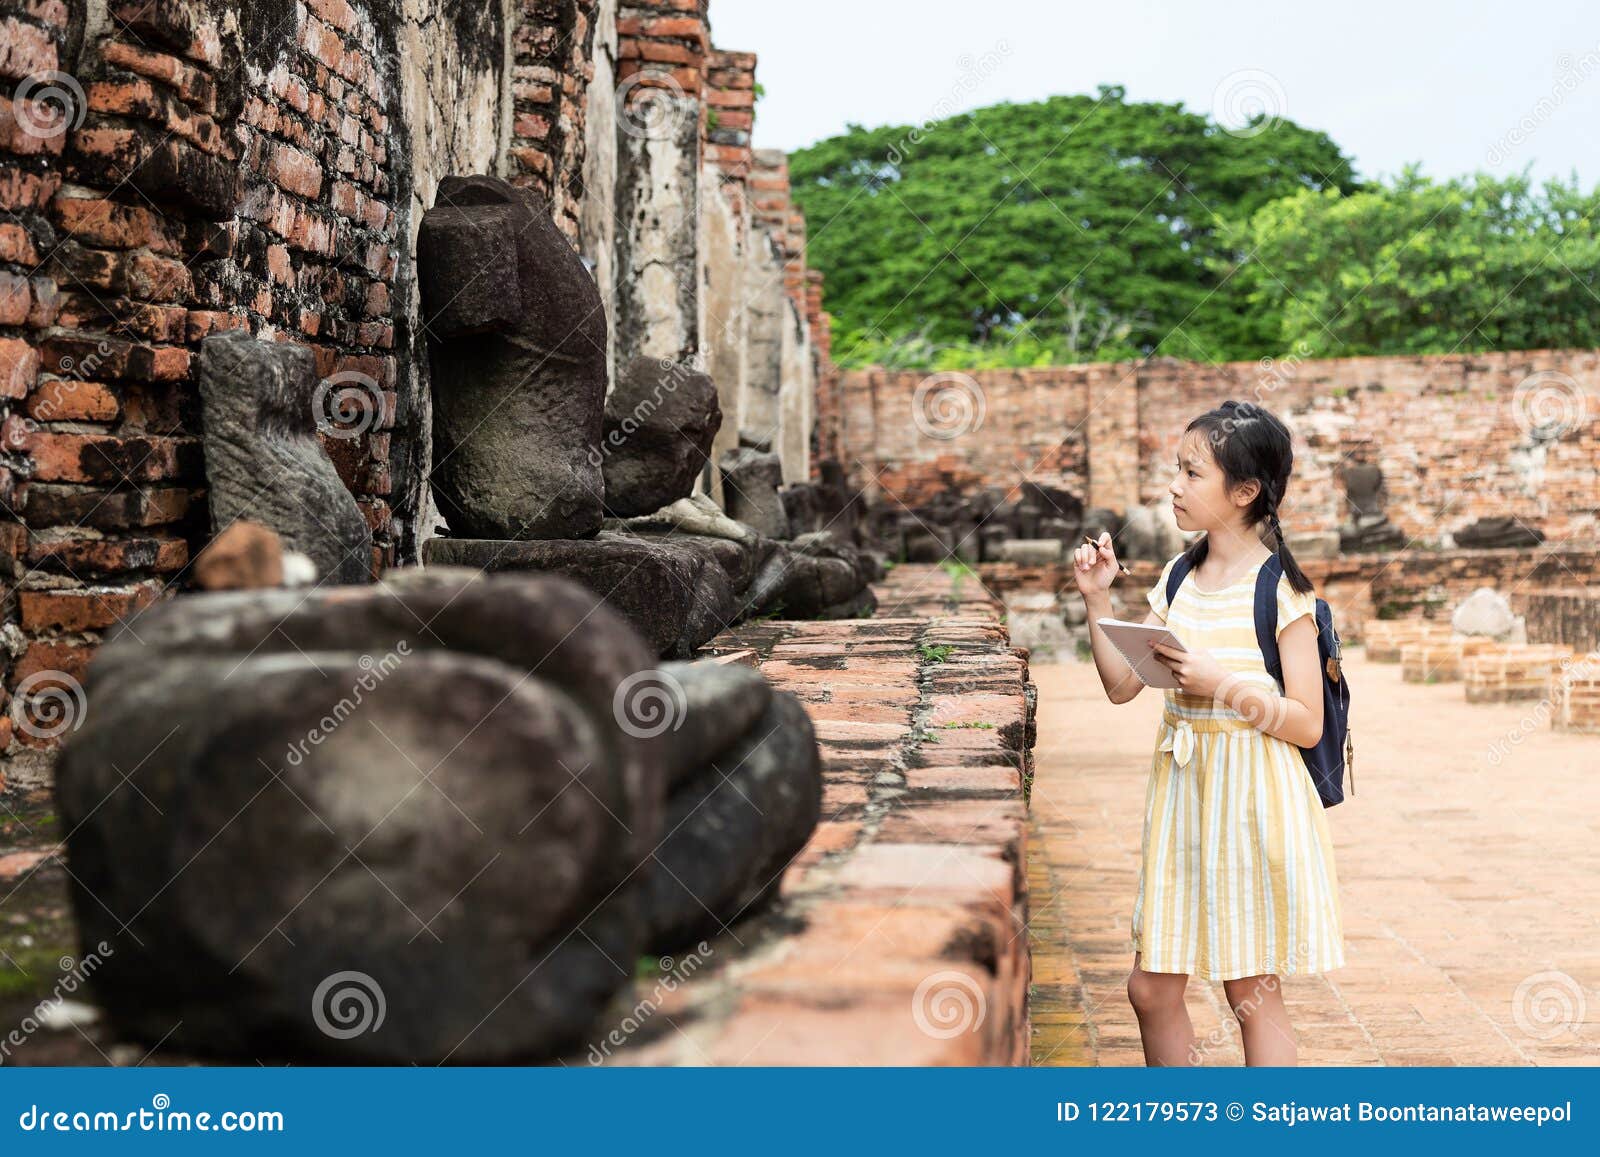 asian young girl is study and learning antiquities,field trip,a